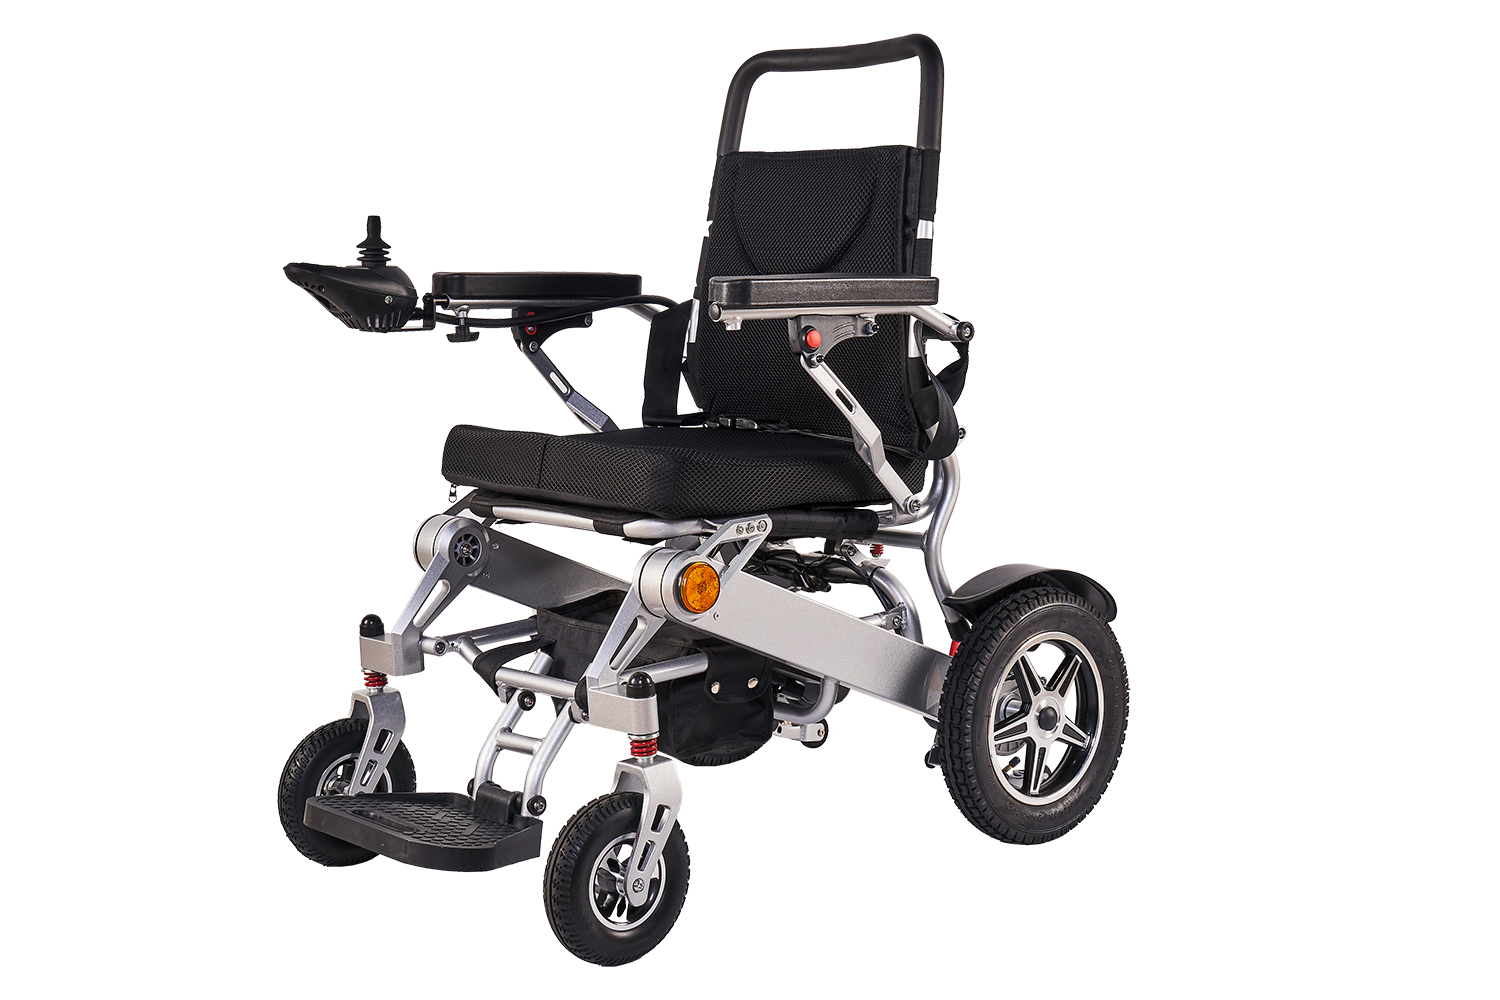 Portable Motorized Wheels: A Future Trend for Consumers–Discovering the Ultimate Lightweight, Portable Electric Wheelchair